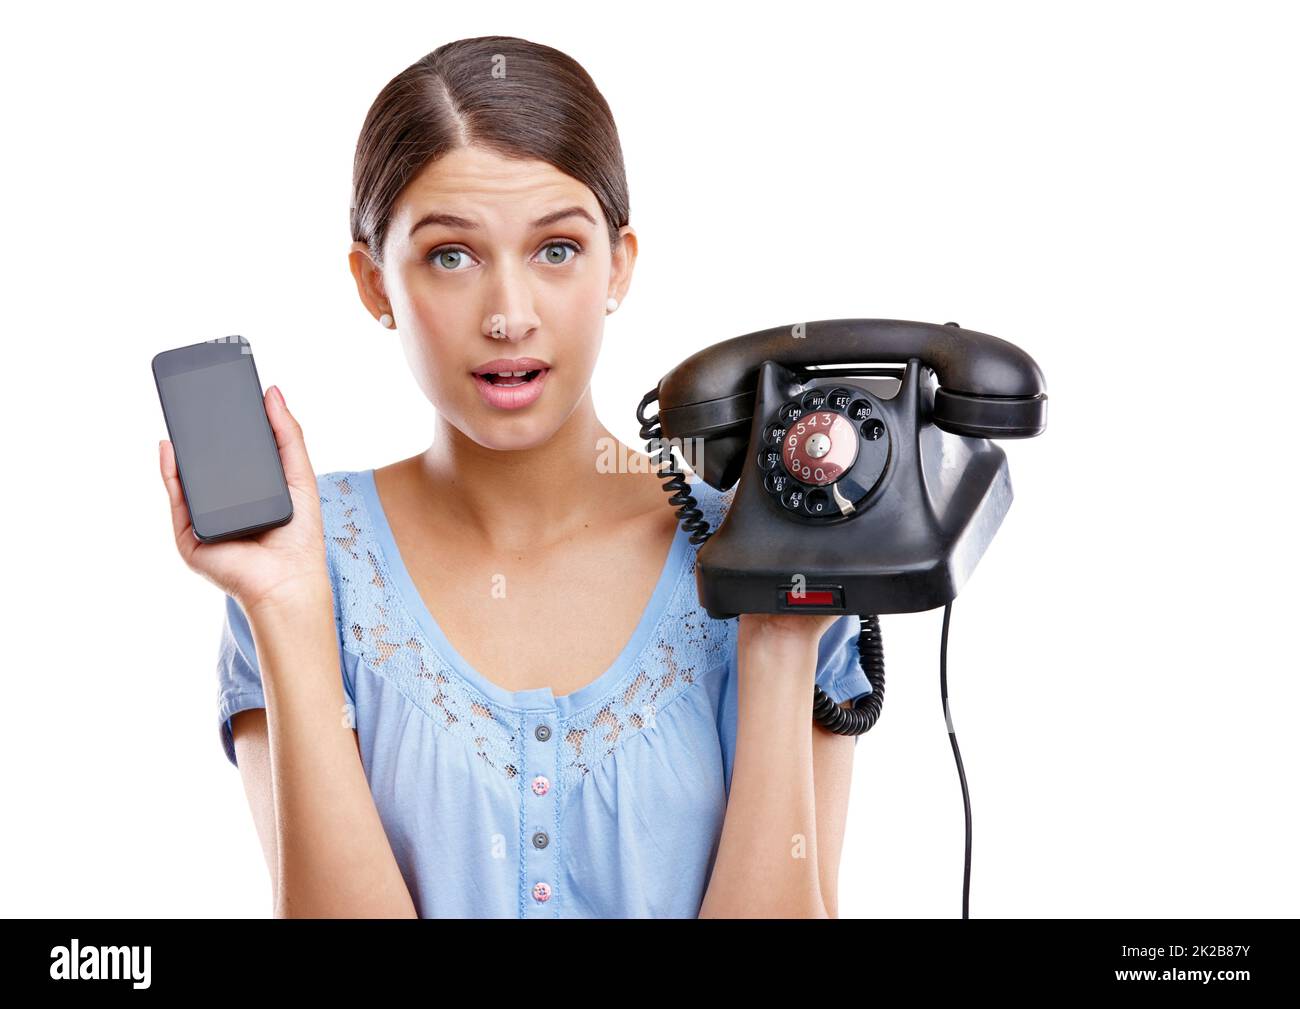 Call us for more information. A young woman holding a mobile phone in one hand and an old-fashioned phone in the other. Stock Photo